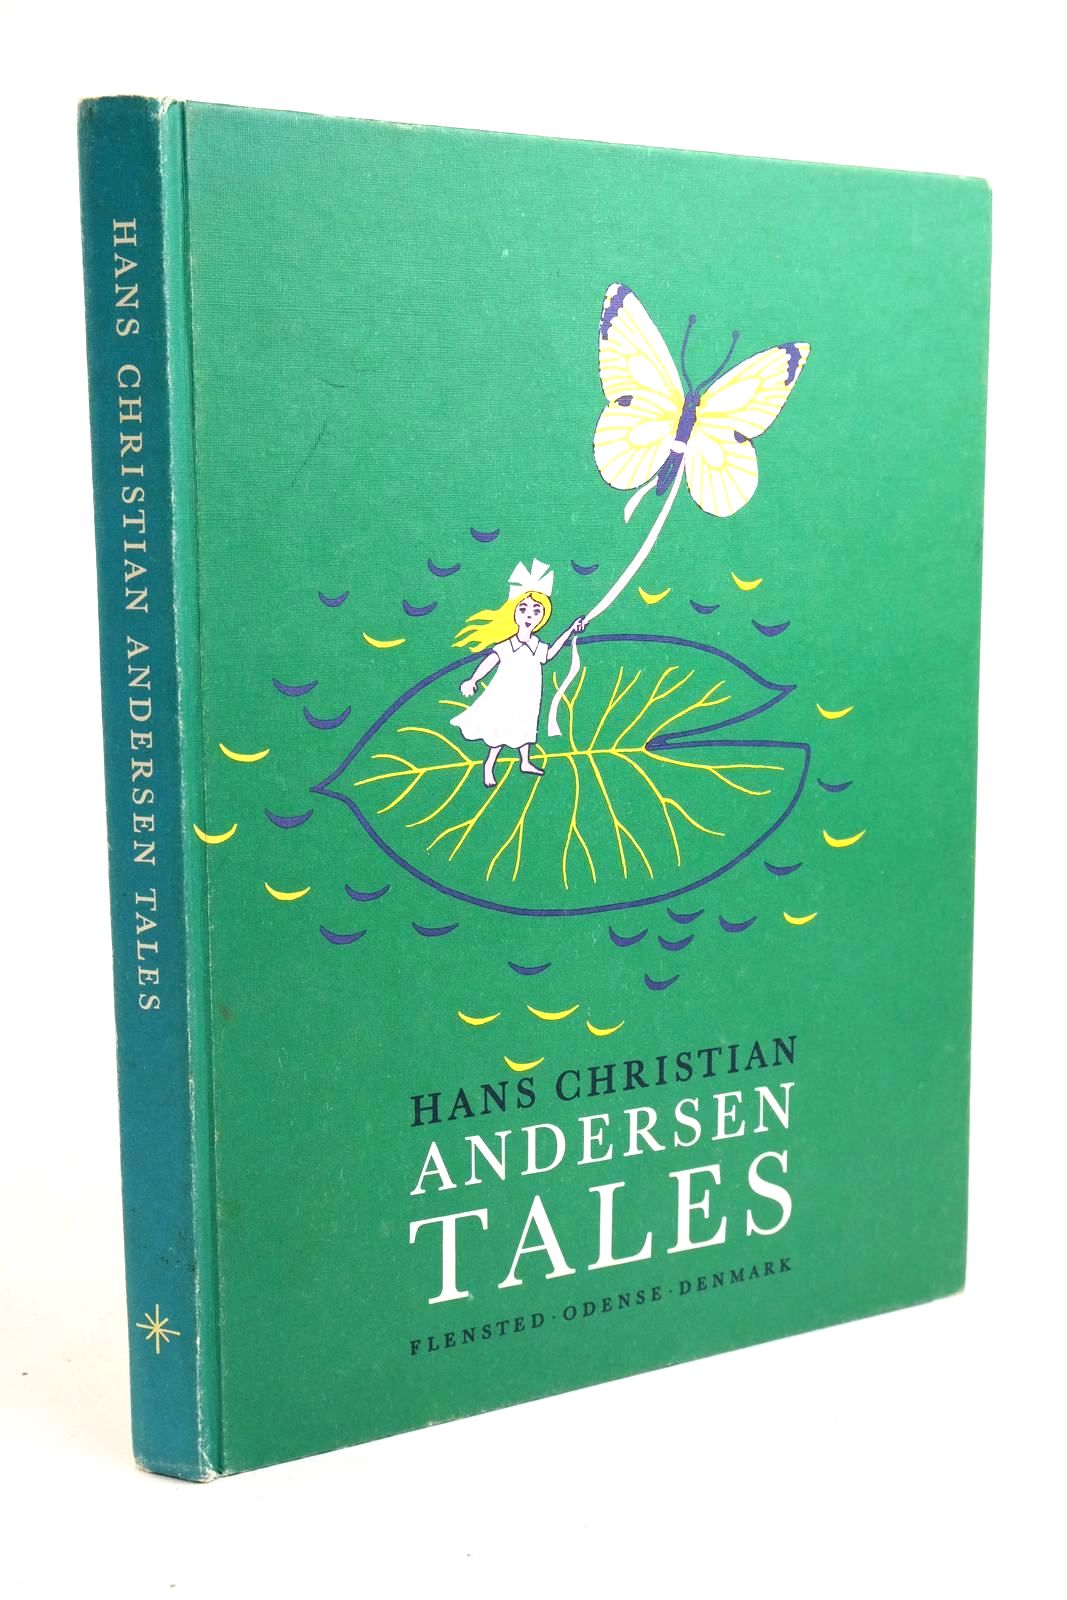 Photo of HANS CHRISTIAN ANDERSEN TALES written by Andersen, Hans Christian illustrated by Hjortlund, Gustav published by Flensted (STOCK CODE: 1321623)  for sale by Stella & Rose's Books